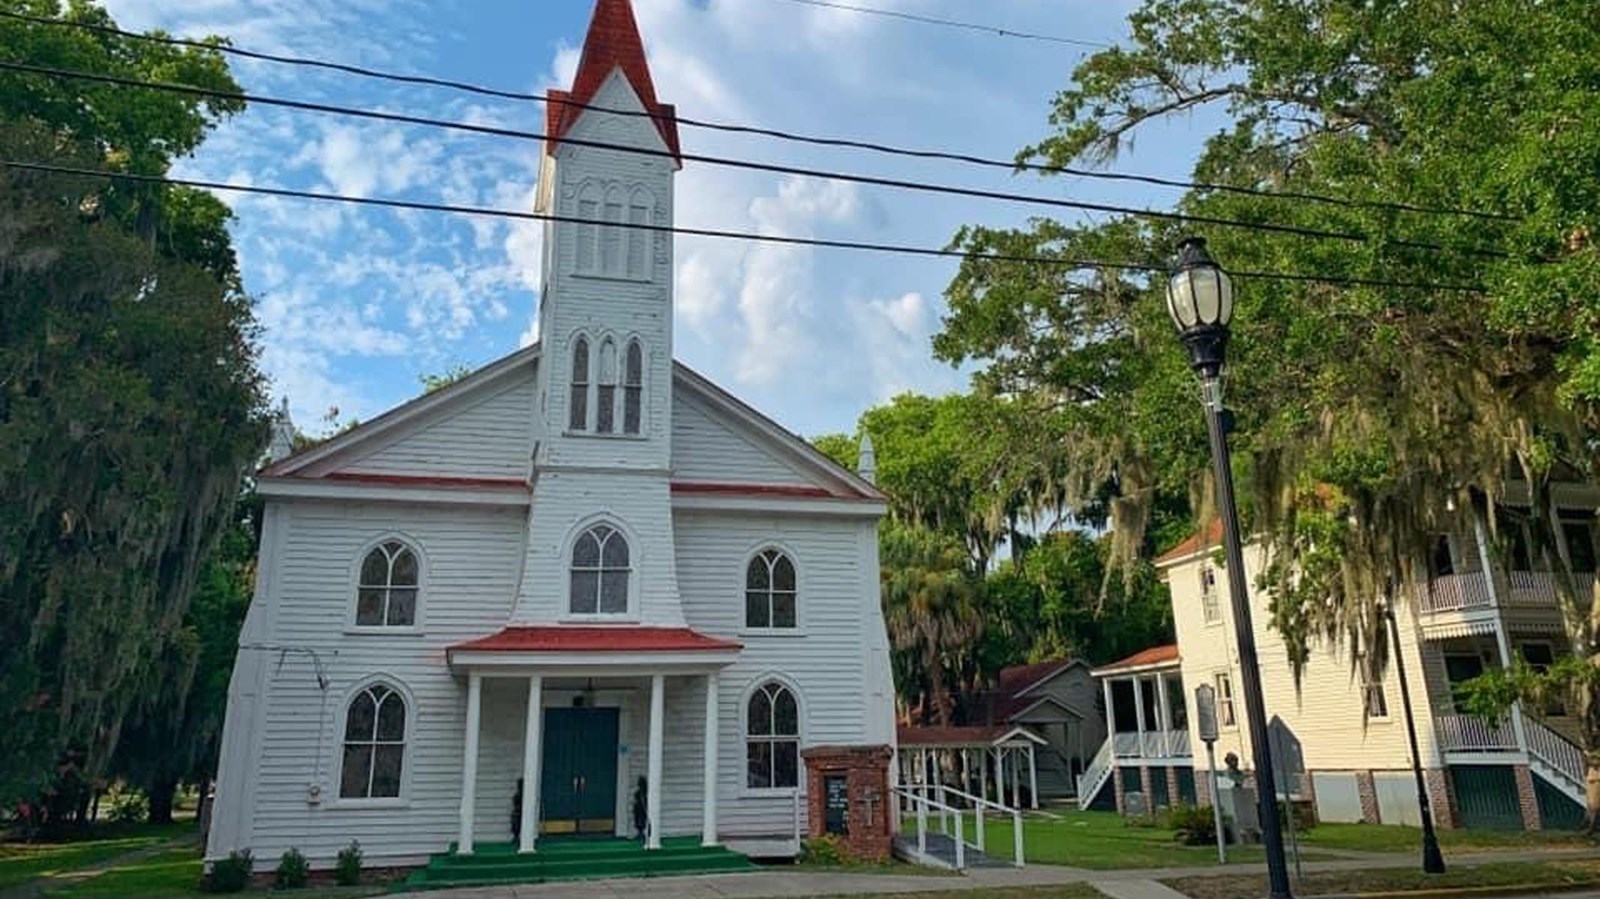 A two-story white church with a red roof and tall spire.